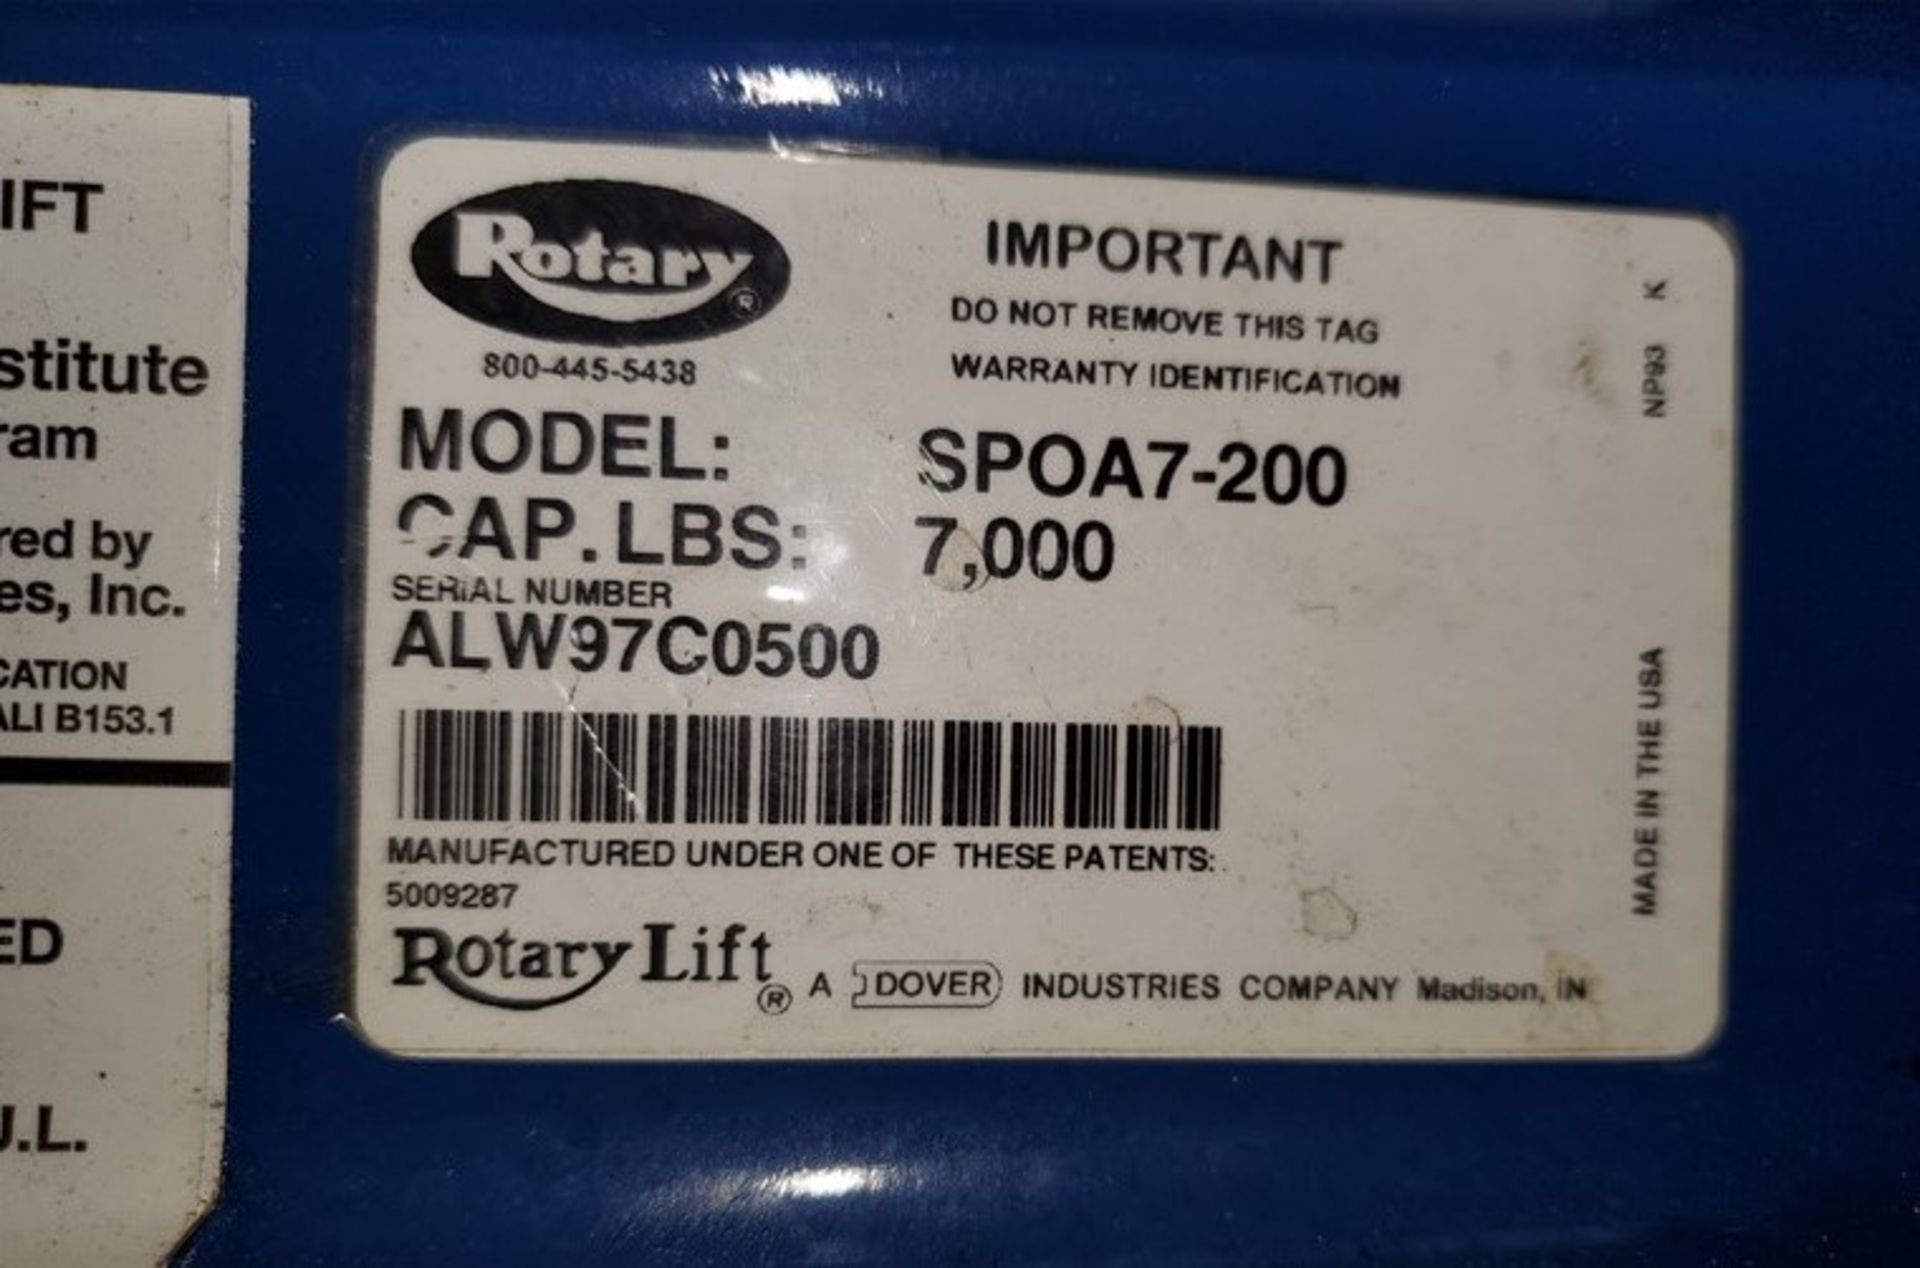 Rotary Model SPOA7-200 (7,000#) 2-Post Surface Lift s/n ALW97C0500 (1 x Your Bid) - Image 2 of 4